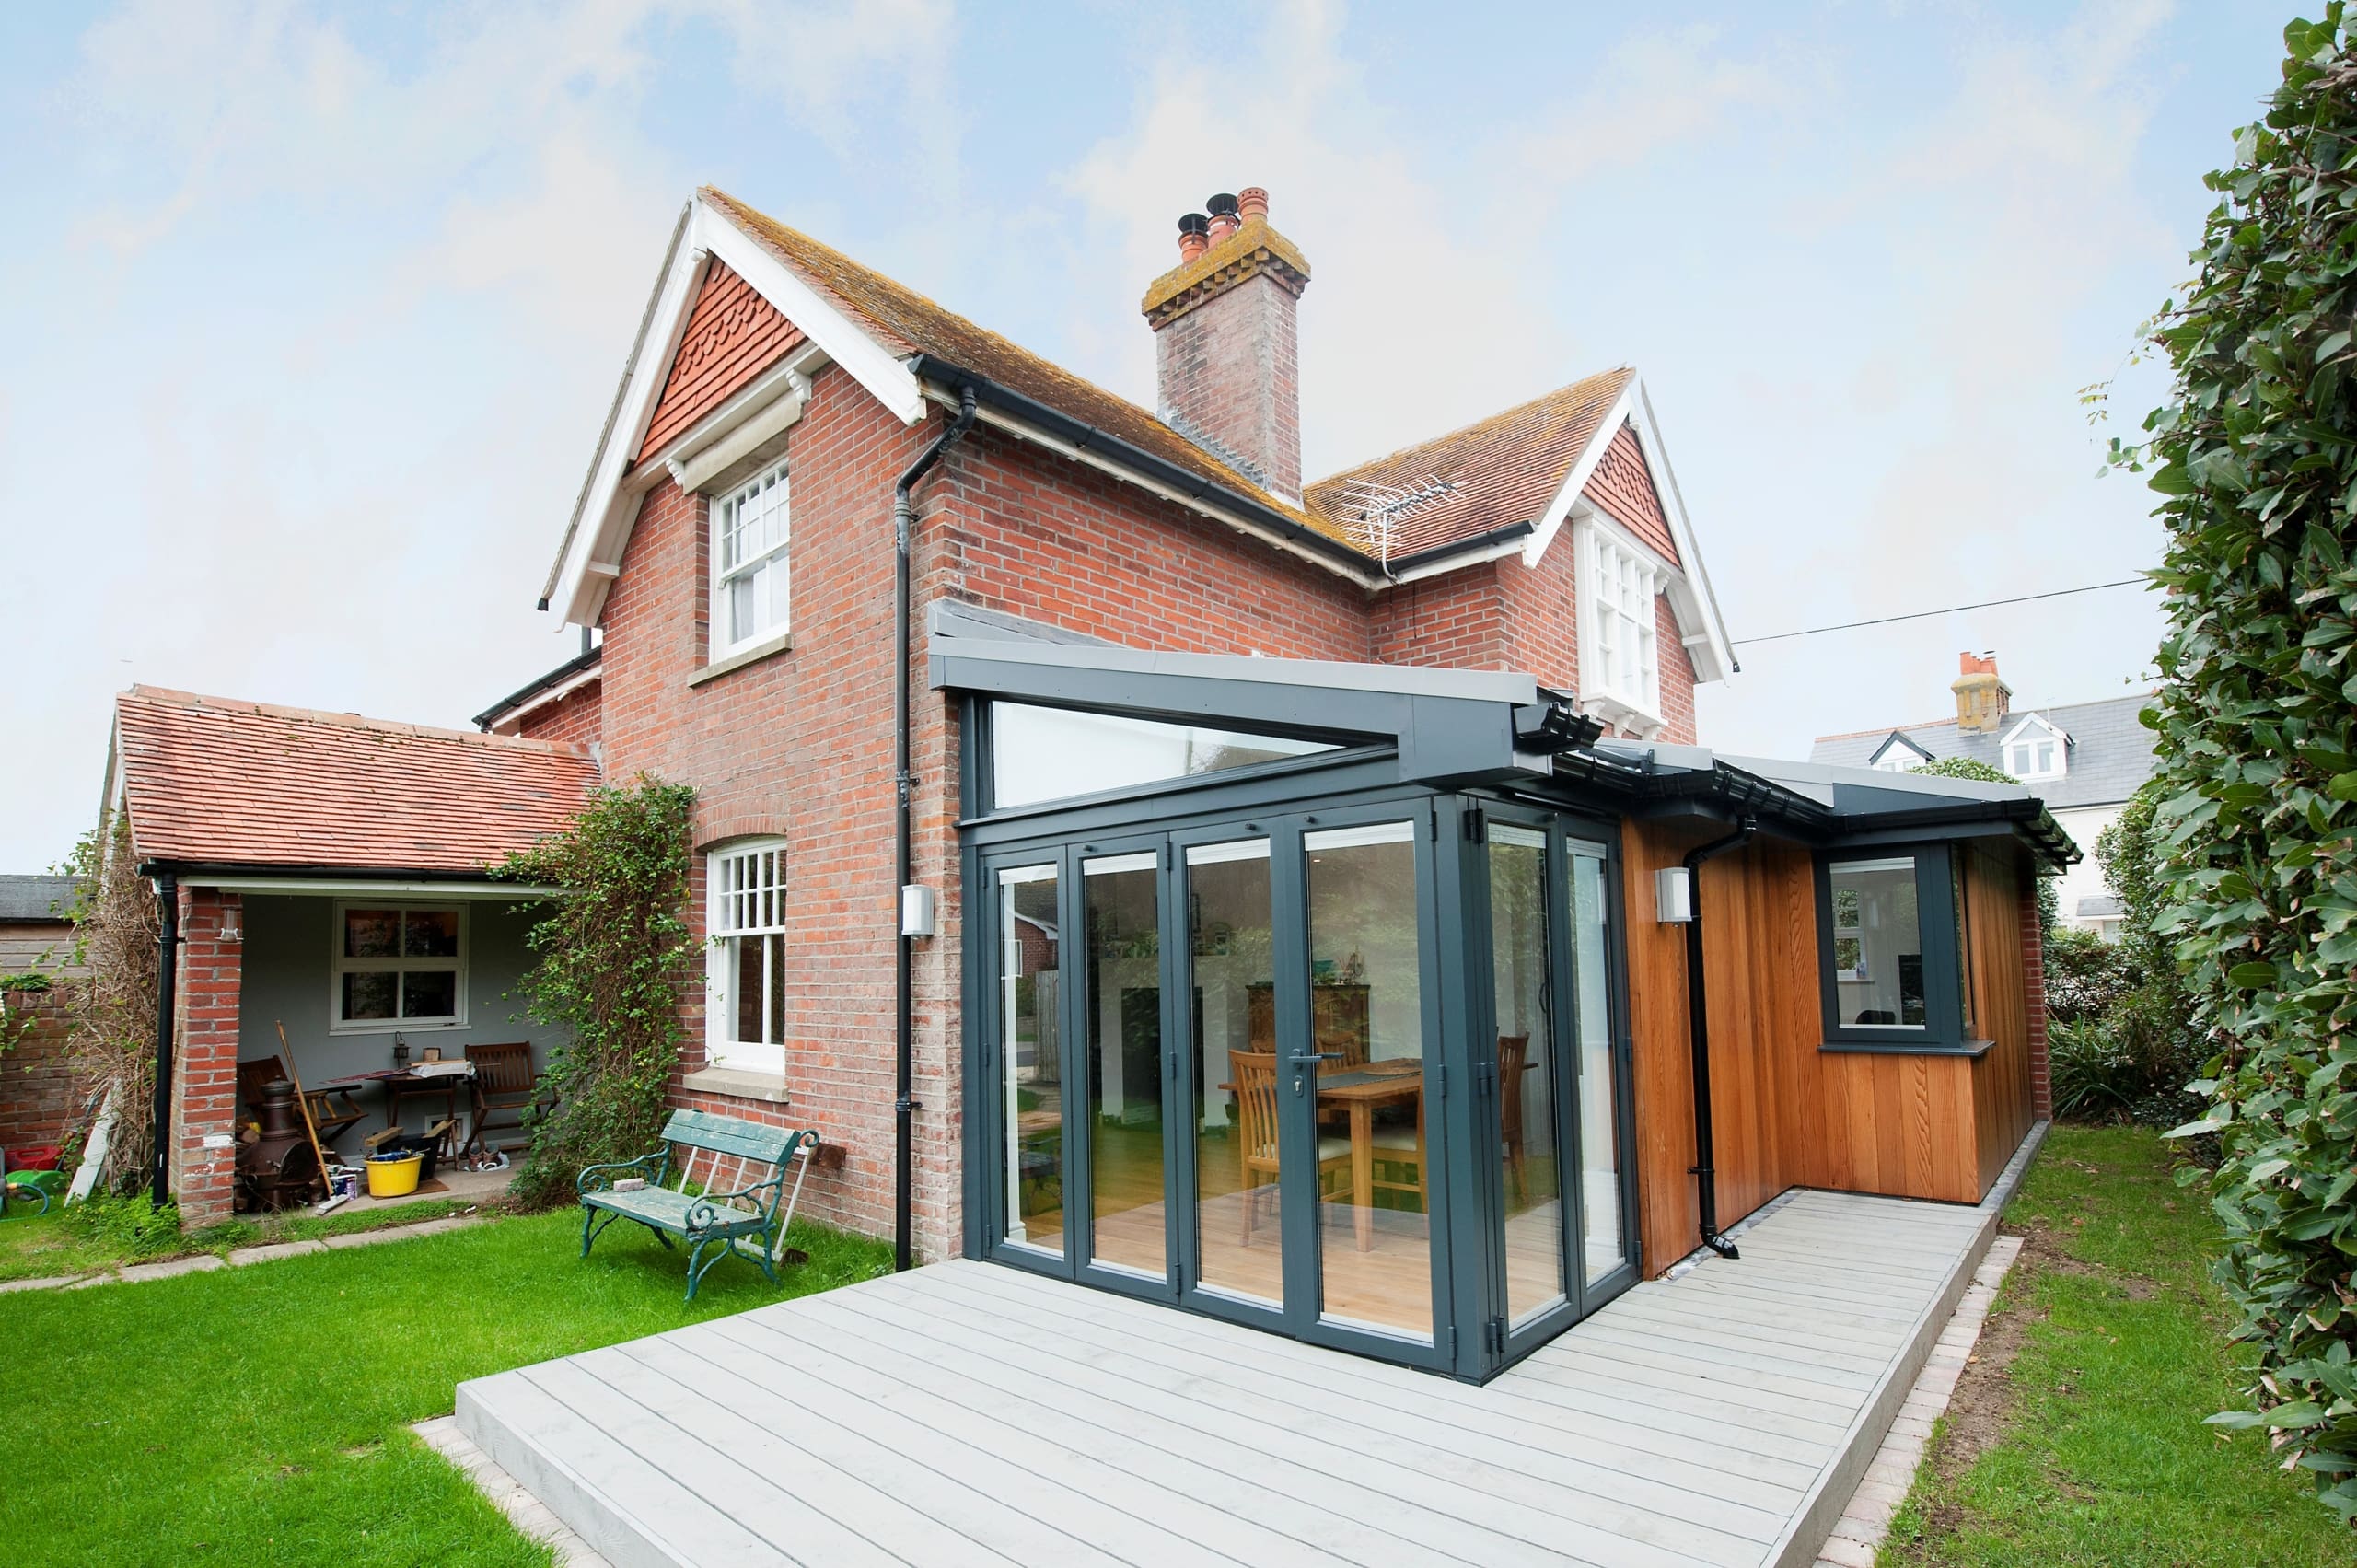 Bifolding door to rear of a house with garden view.